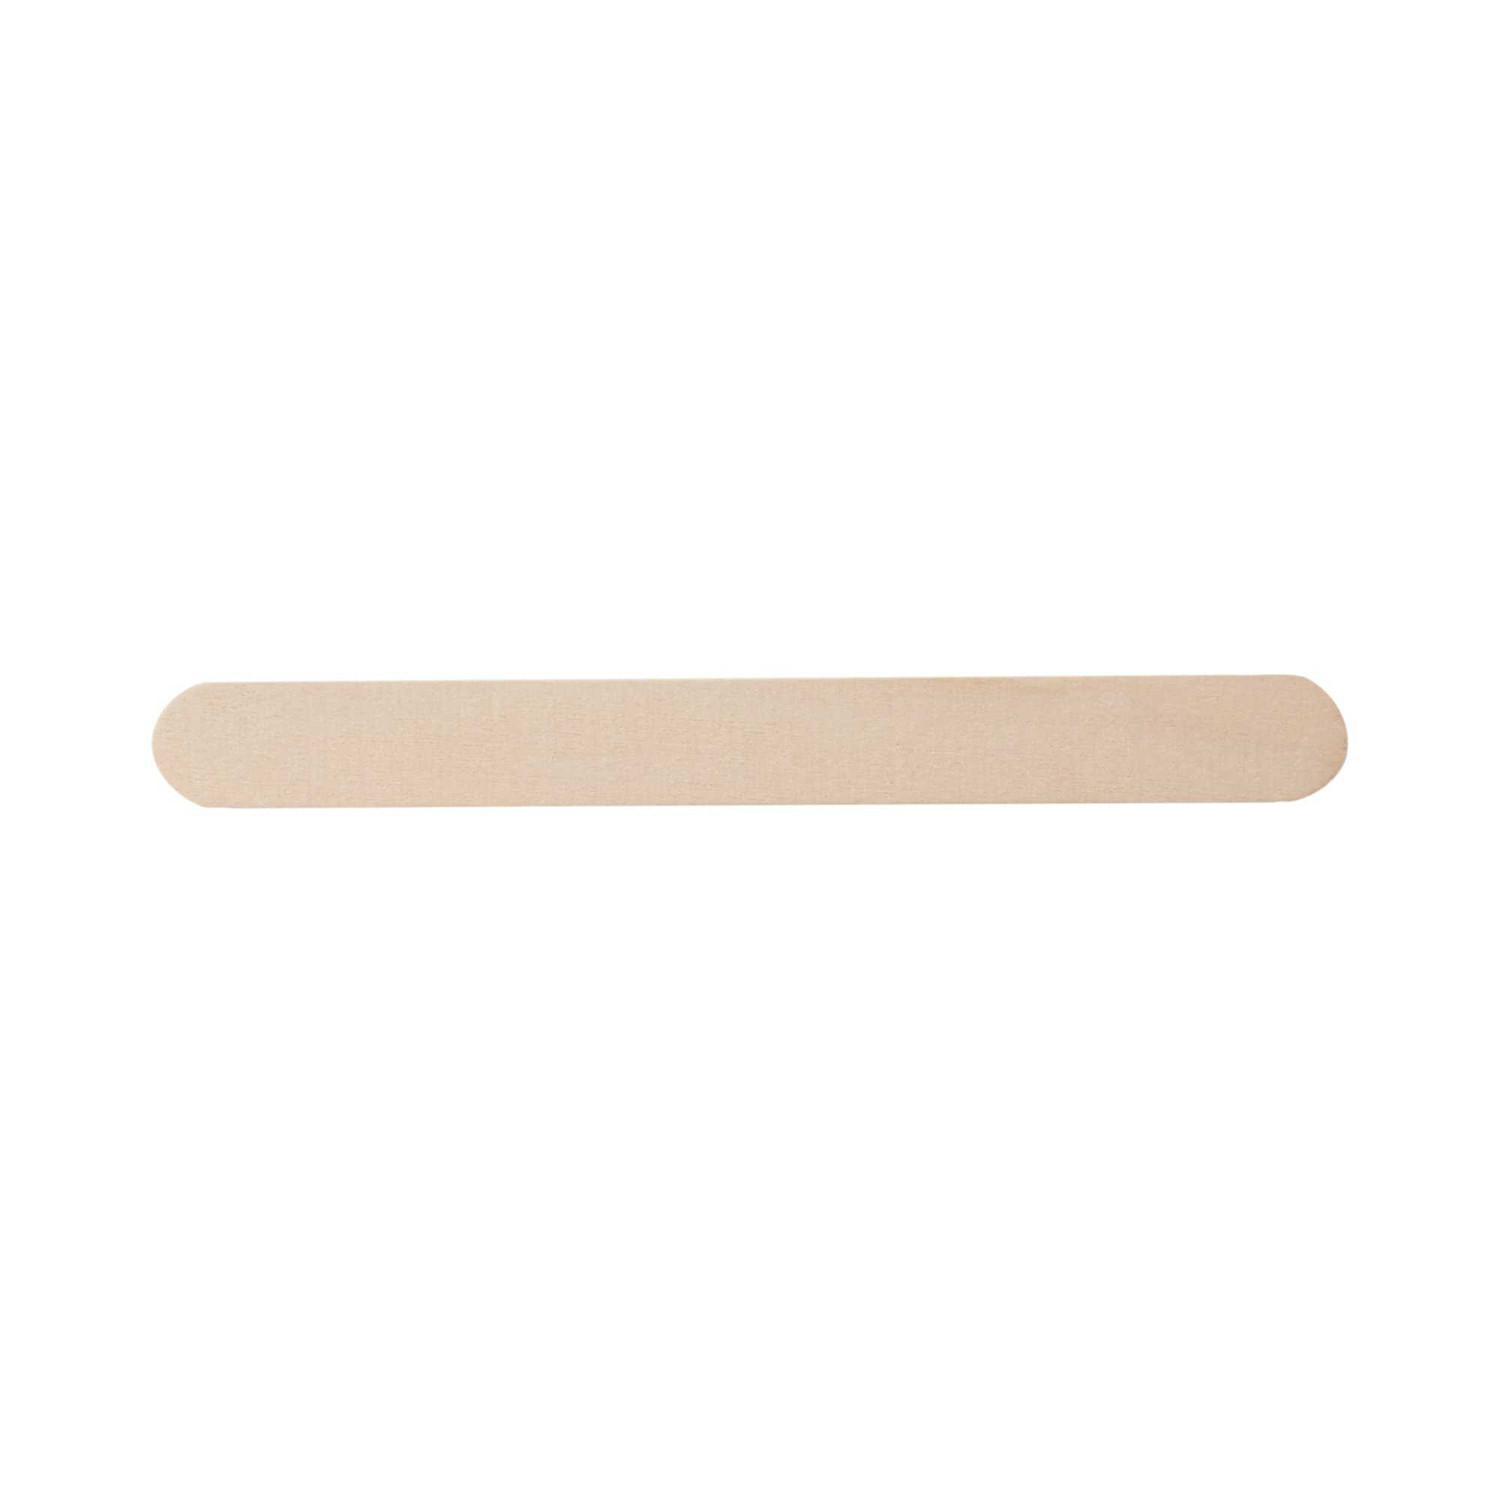 McKesson 6 Inch Length Wood Tongue Depressor Unflavored Sterile 24